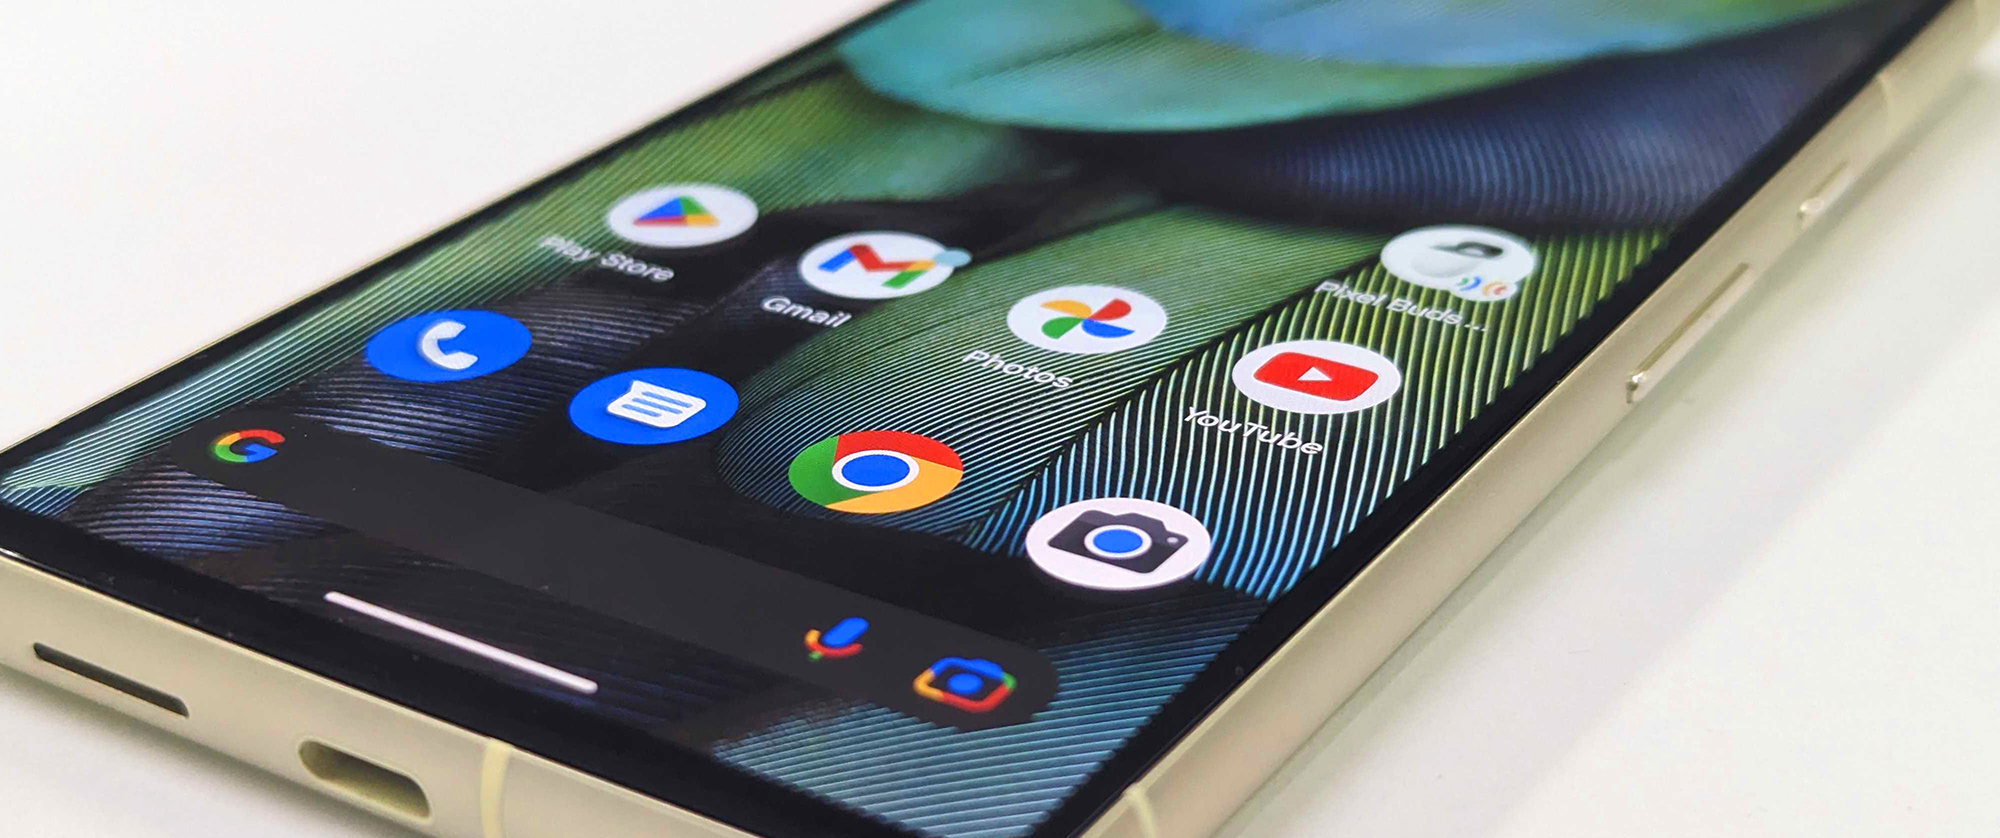 Pixel 6 Pro Review: Google's Flagship Is Still a Top iPhone Rival in 2022 -  CNET